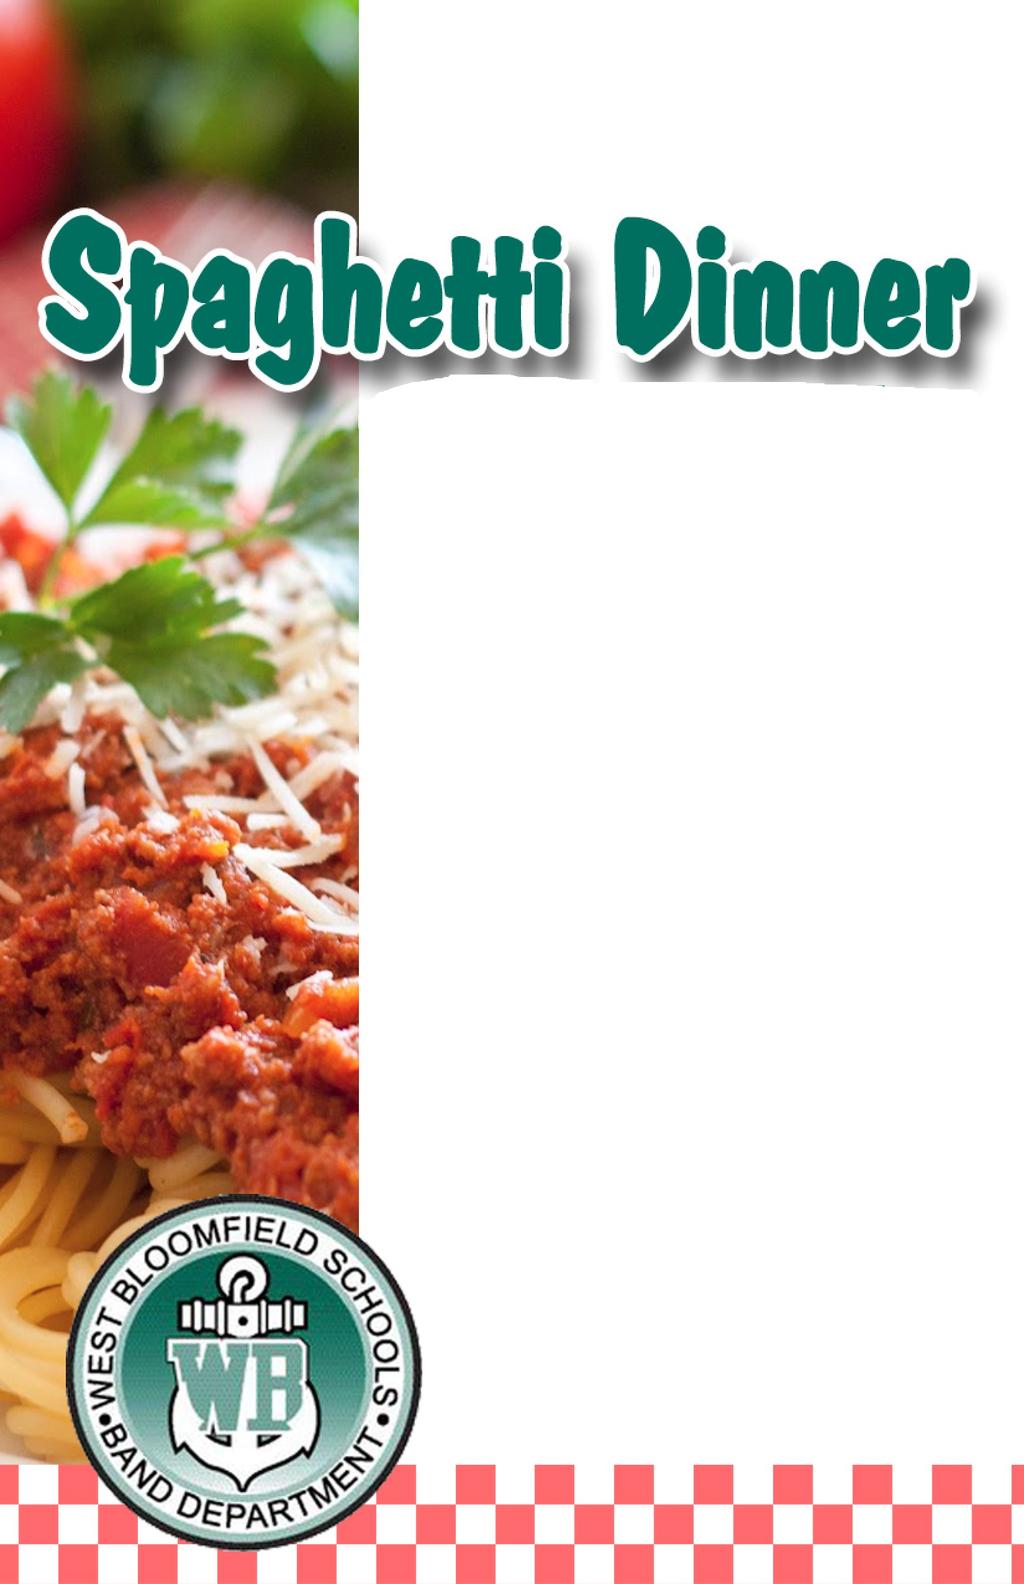 Annual Spaghetti & Meatball Dinner Sunday May, 15 th, 2016 from 1pm 6pm Fire